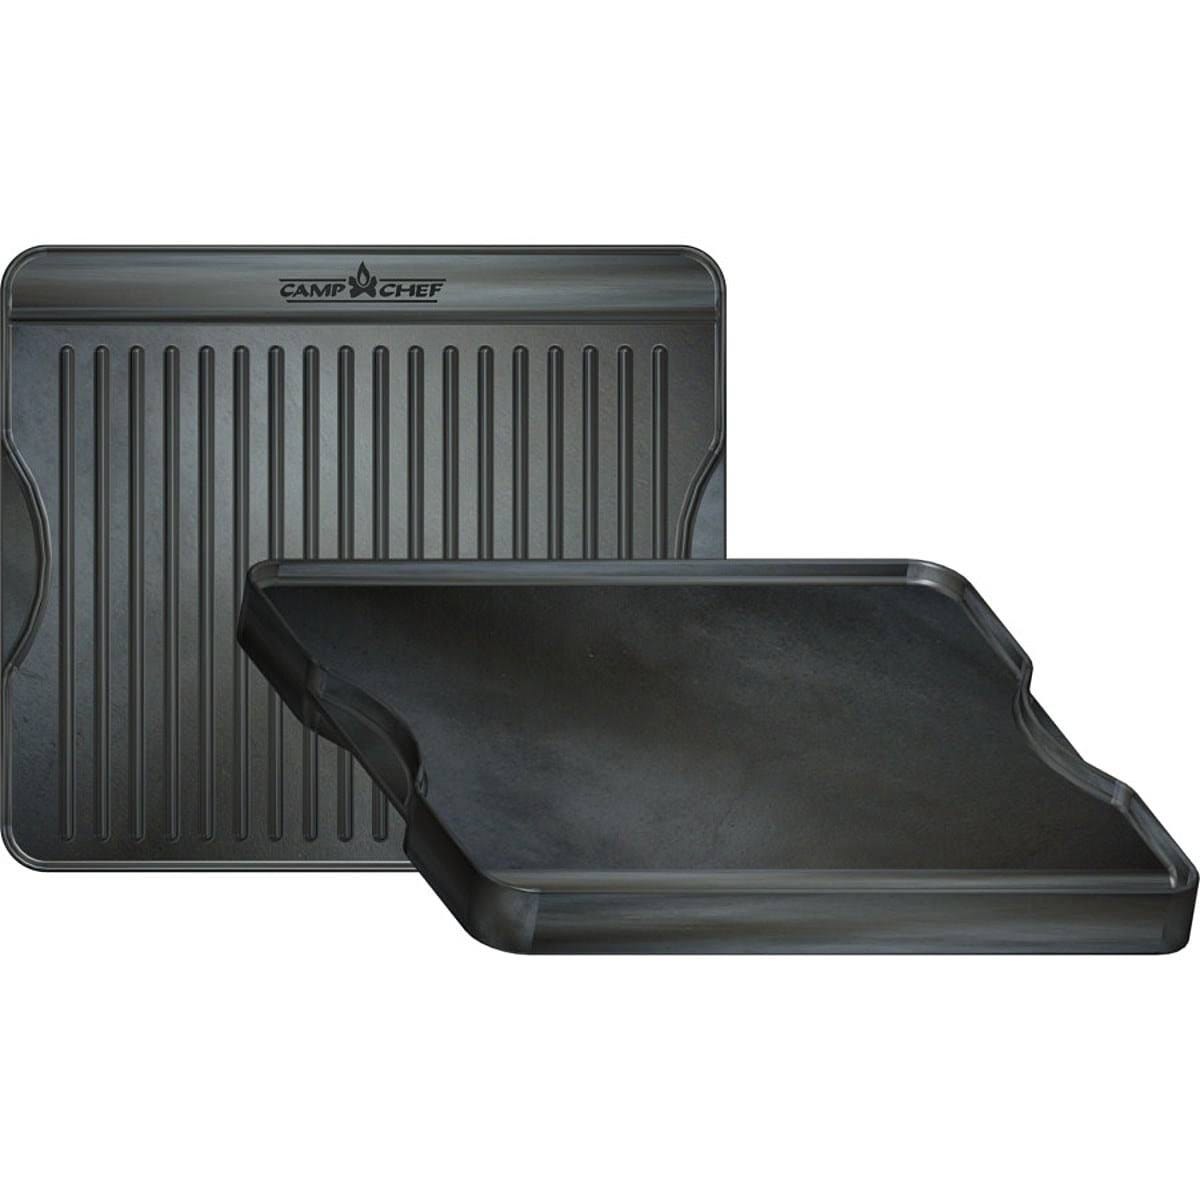 Camp Chef Cast Iron Griddle: 14 in. L x 16 in. W - Perfect for Sizzling Cookouts | Image